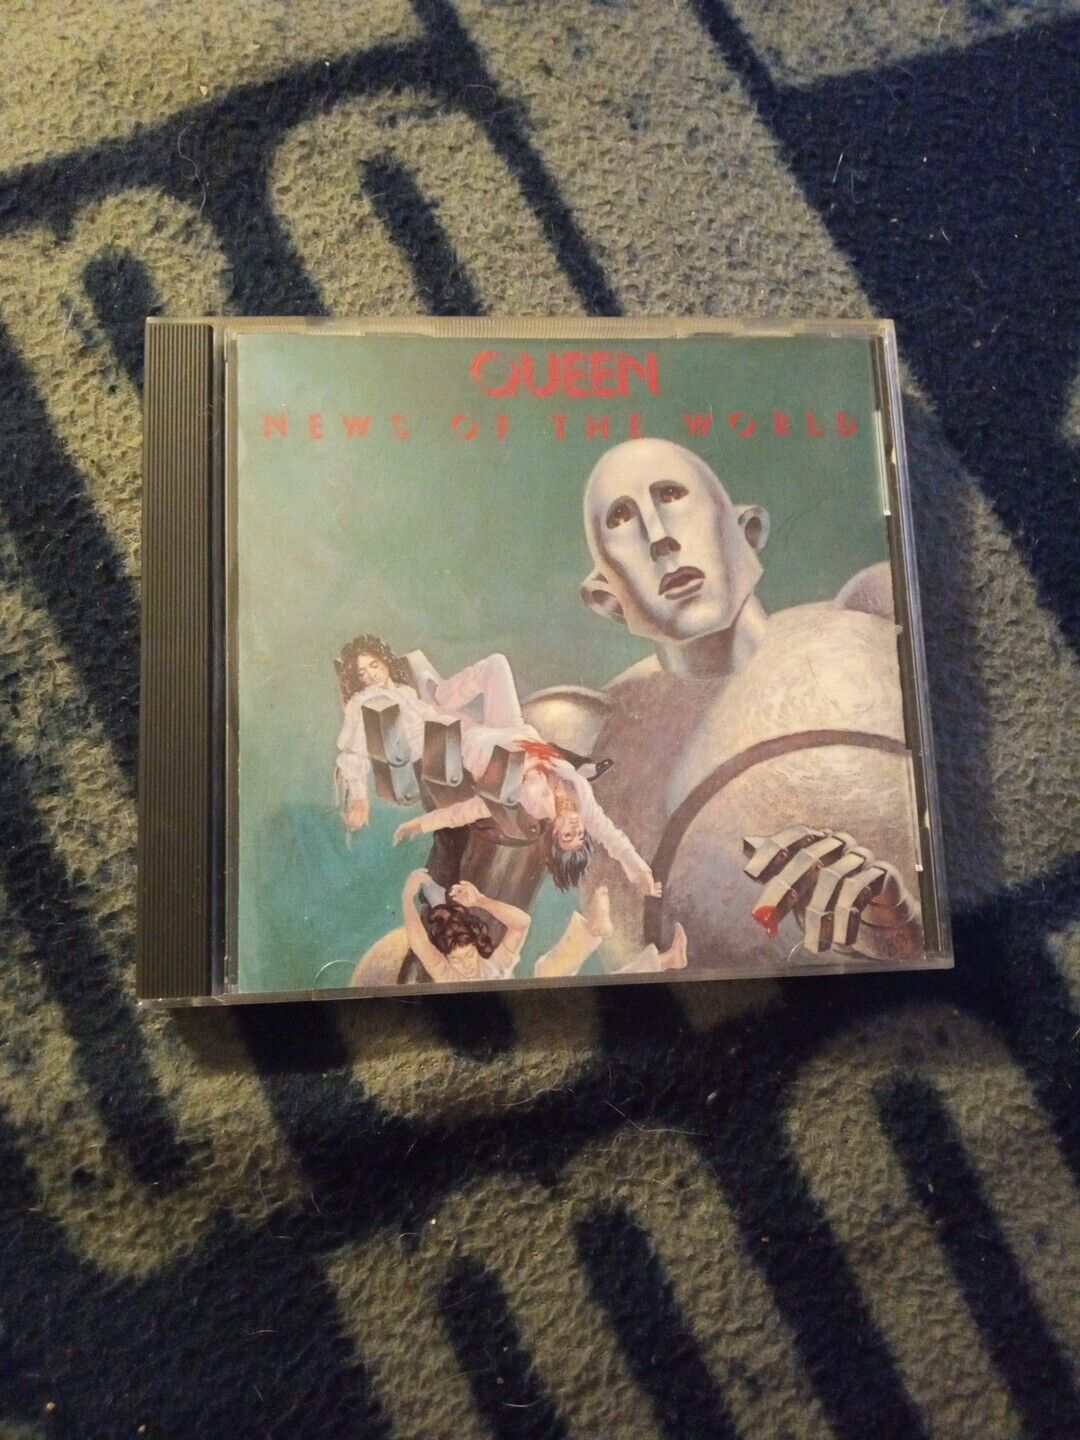 News of the World by Queen (CD, 1991)